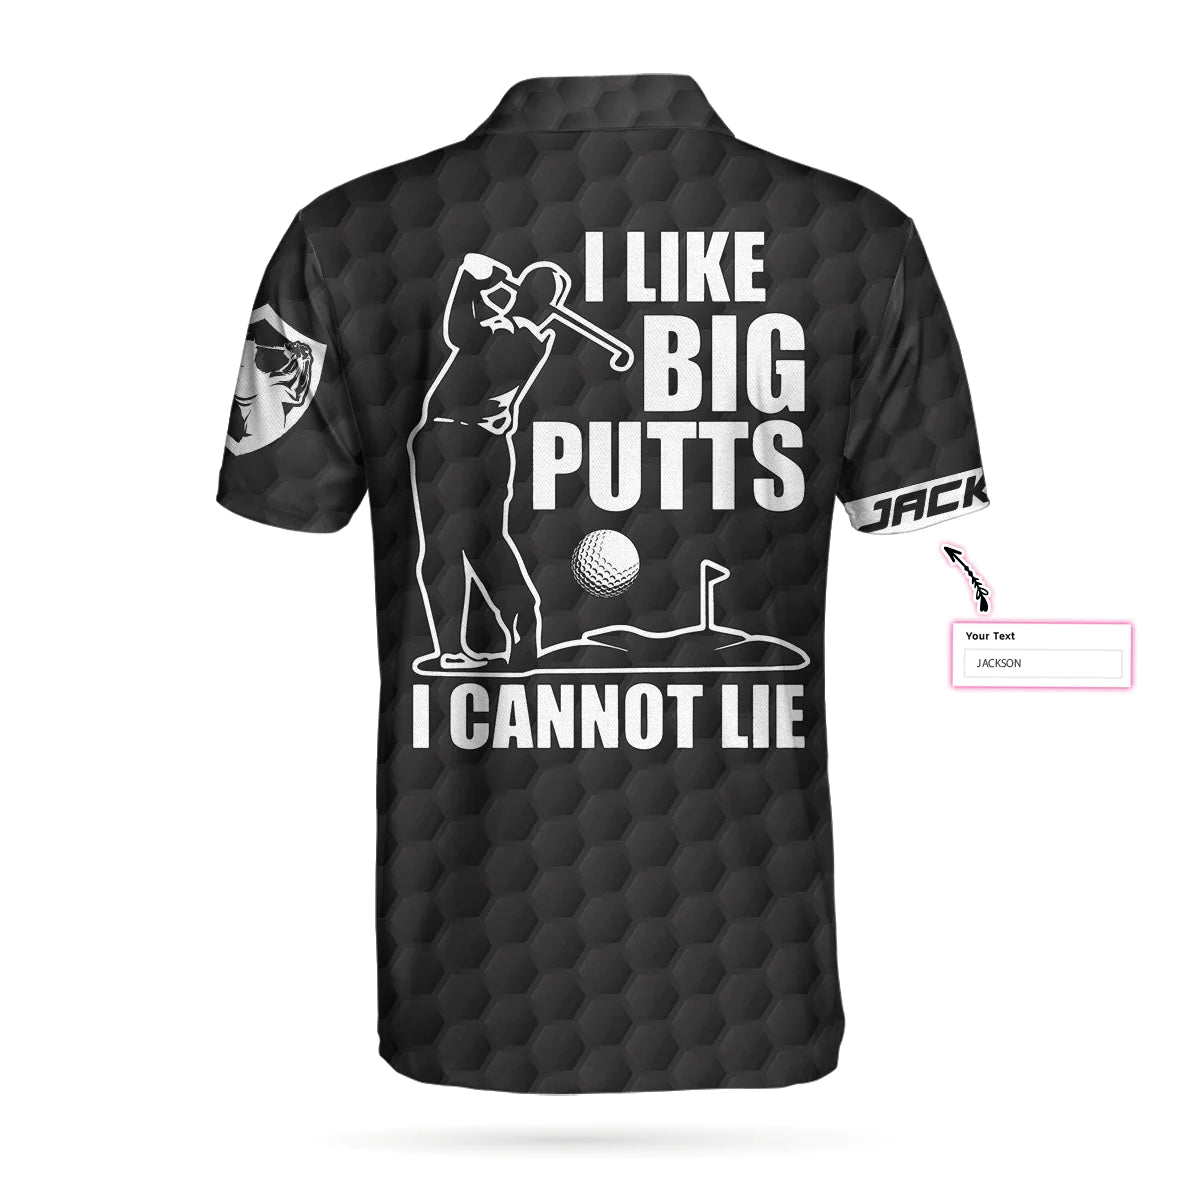 customized american flag polo shirt with i like big putts i cannot lie design the ultimate golf shirt for men gp413 r7jkp